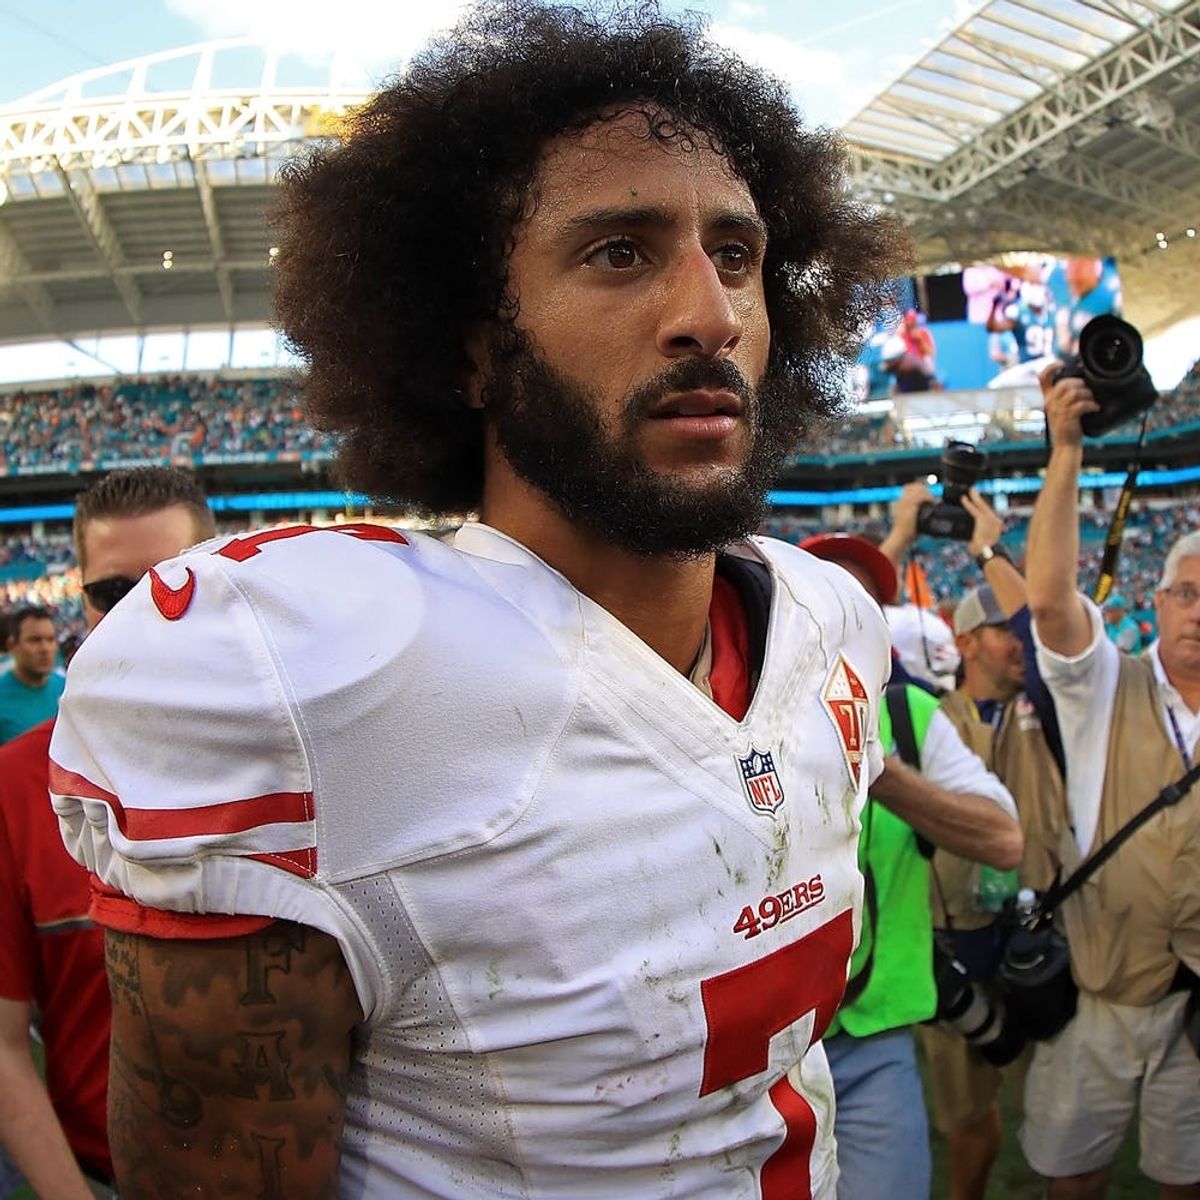 Colin Kaepernick Named GQ “Citizen of the Year”